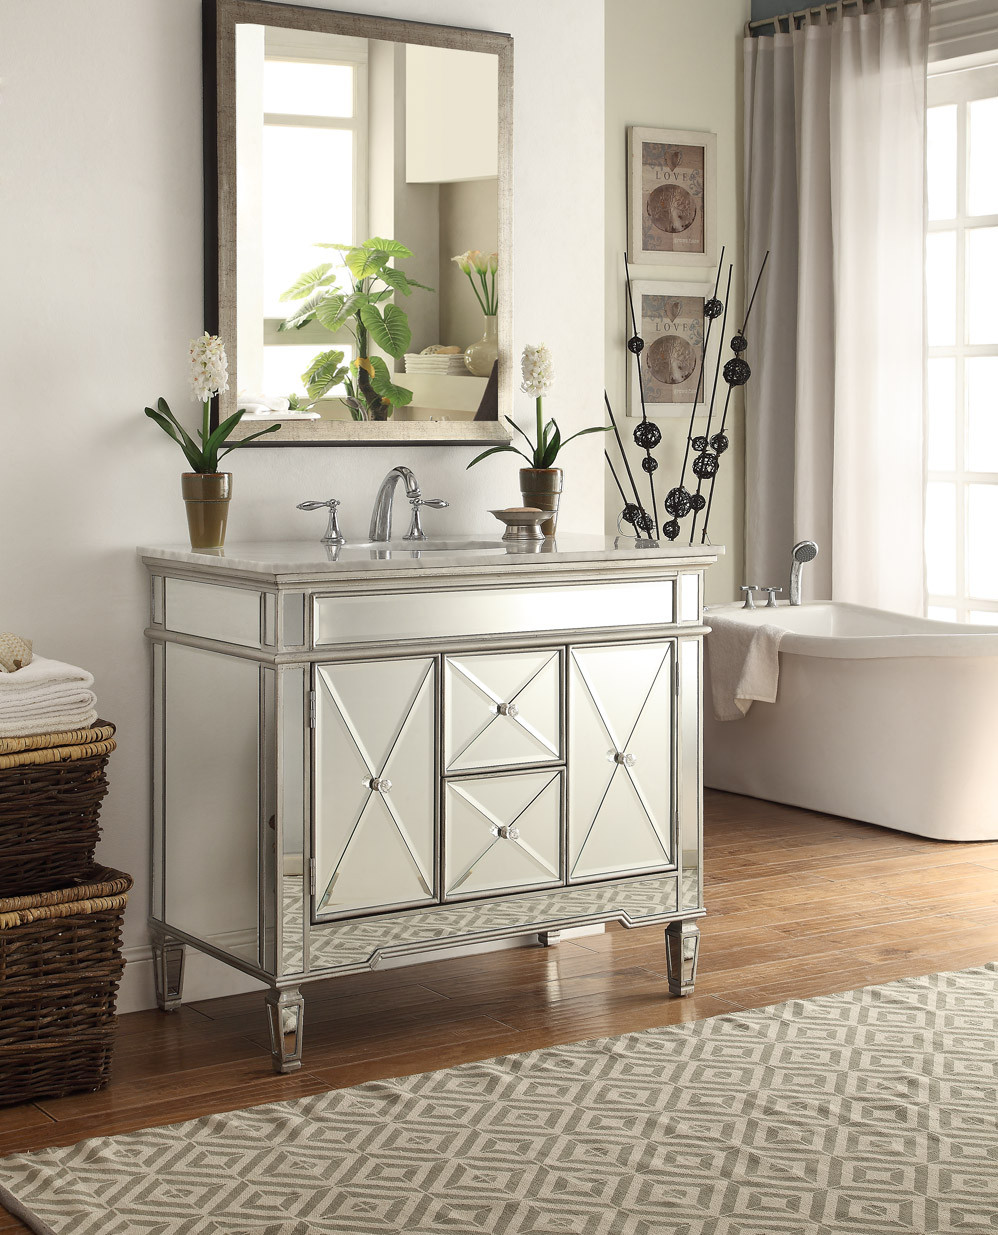 Mirrored Vanities For Bathroom
 Accessories Contemporary Makeup Dressing Bedroom With